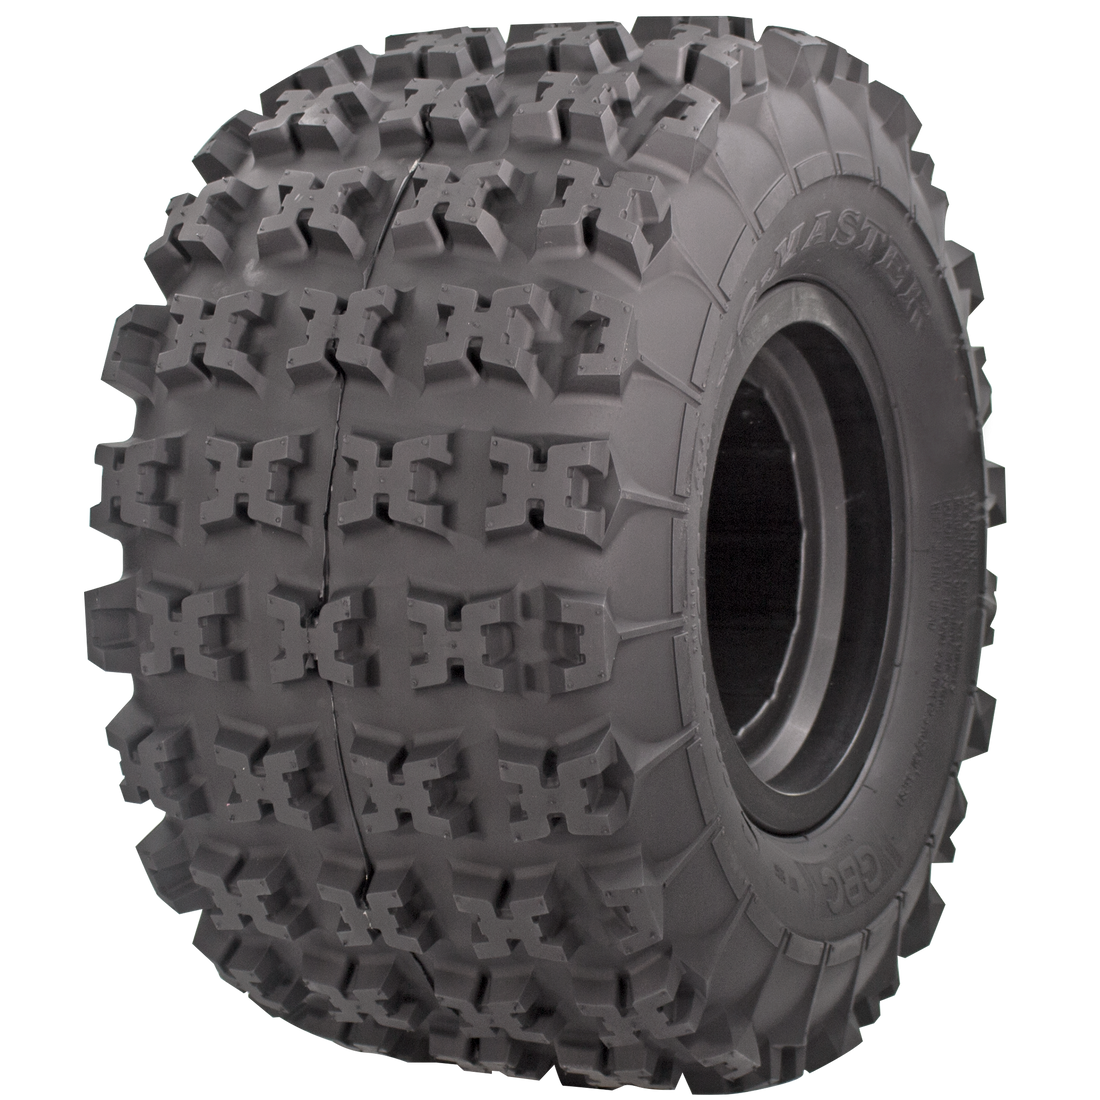 Angle view of the XC-Master ATV rear tire. This angle displays the X-knob tread and the sidewall featuring its puncture-resistant casing.